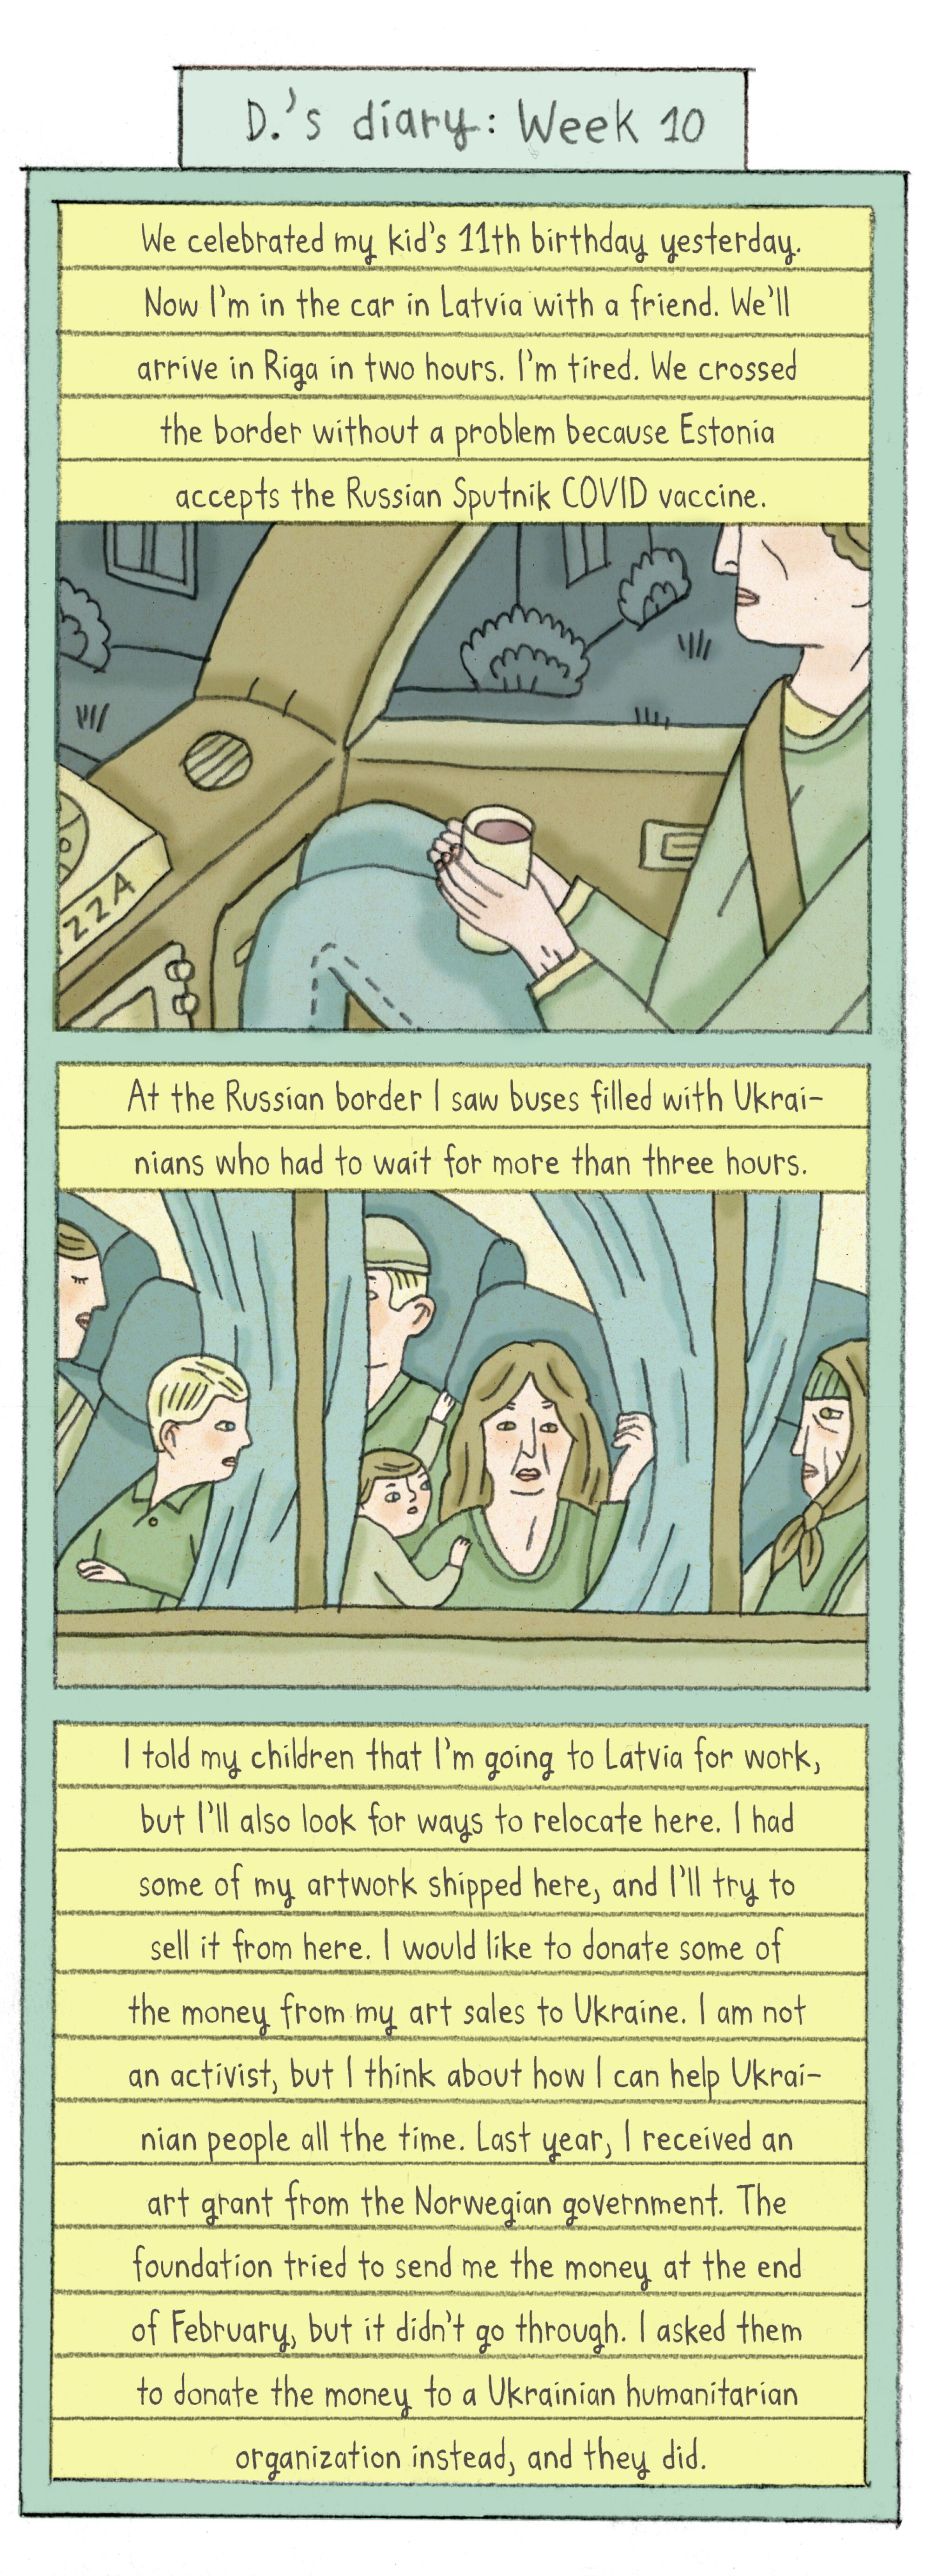 comic depicting a woman sitting in a car holding a cup. Below, people sitting on a bus.